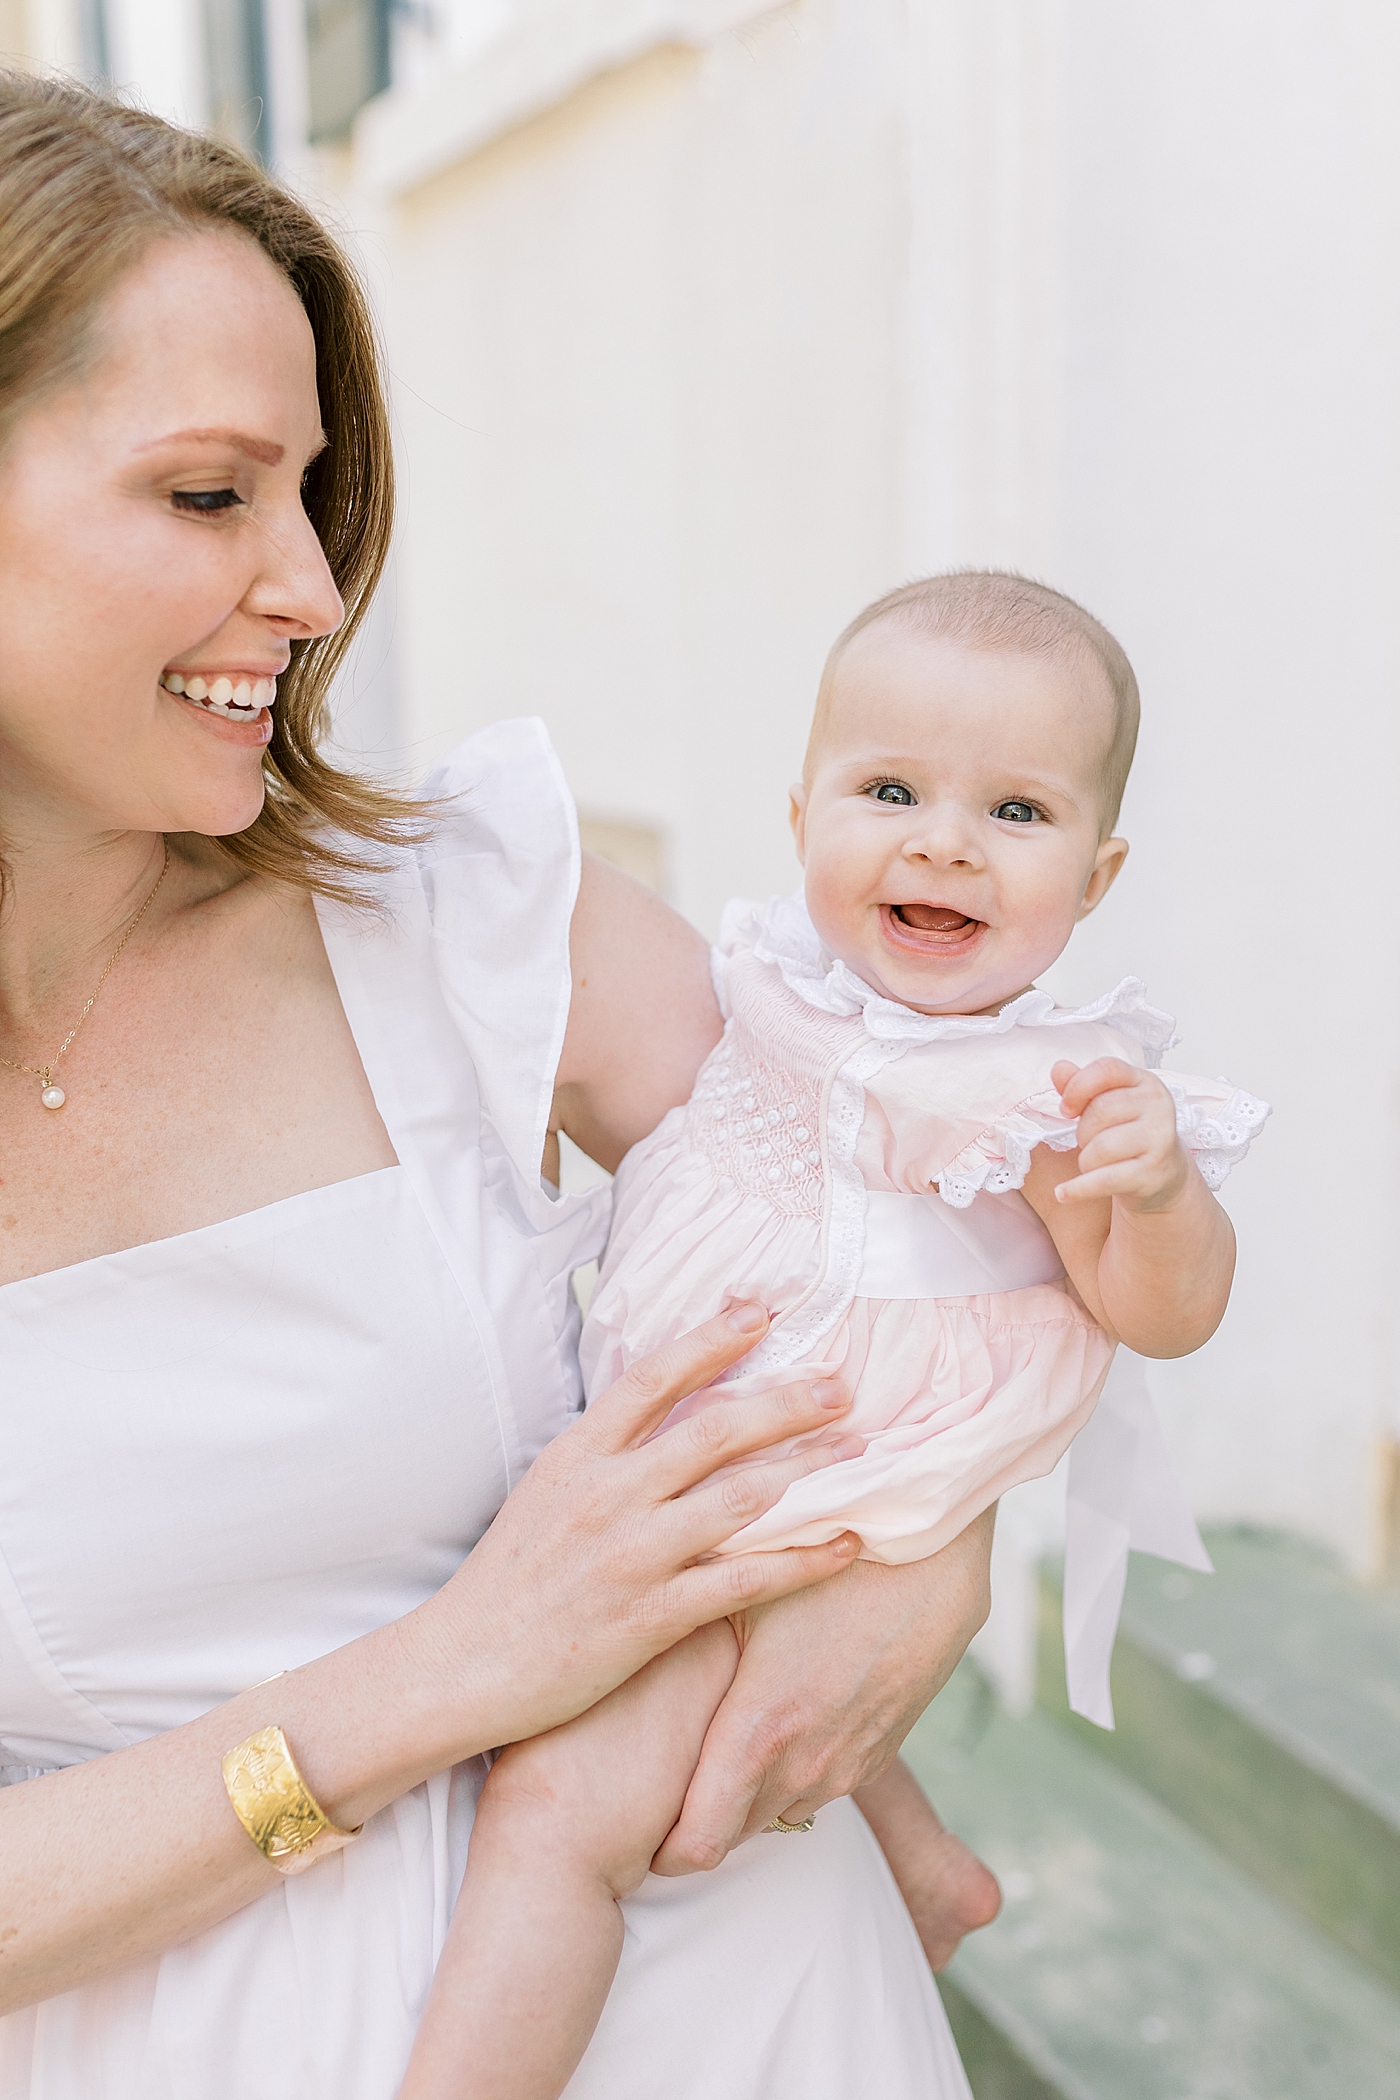 Mother in a spring dress holding her baby | Image by Caitlyn Motycka